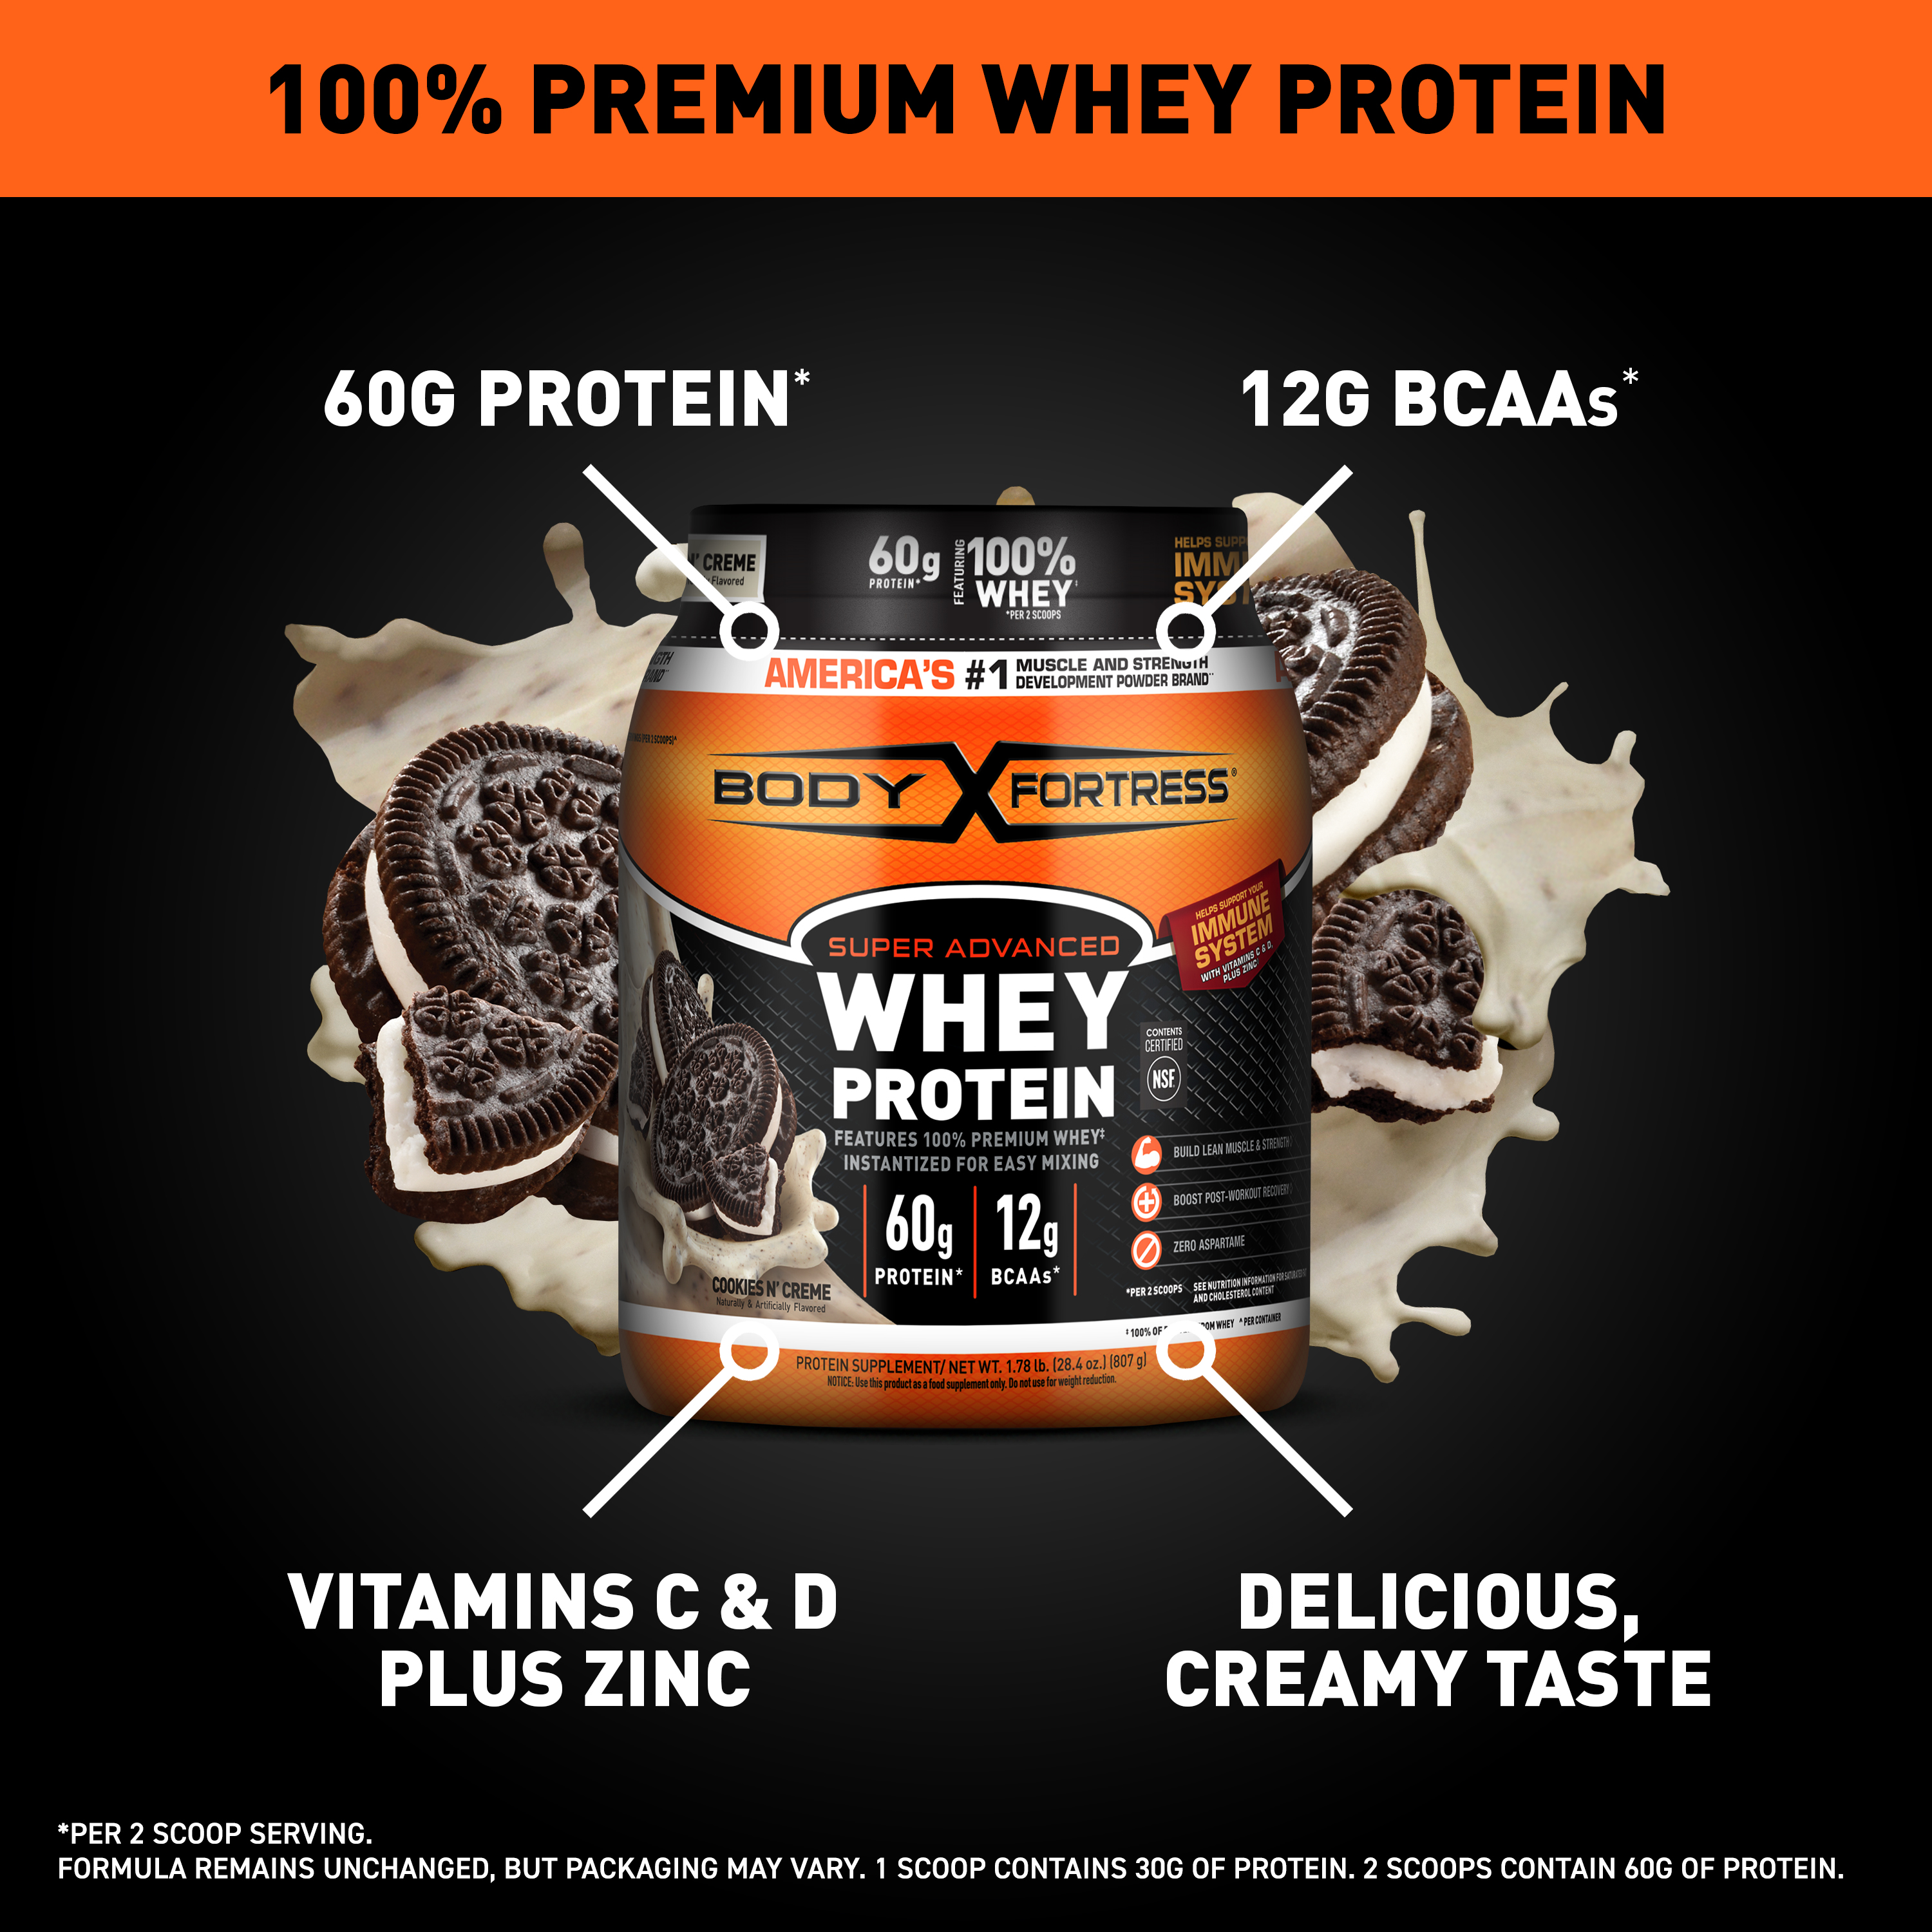 Body Fortress 100% Whey, Premium Protein Powder, Cookies N' Cream, 1.78lbs (Packaging May Vary) - image 2 of 7